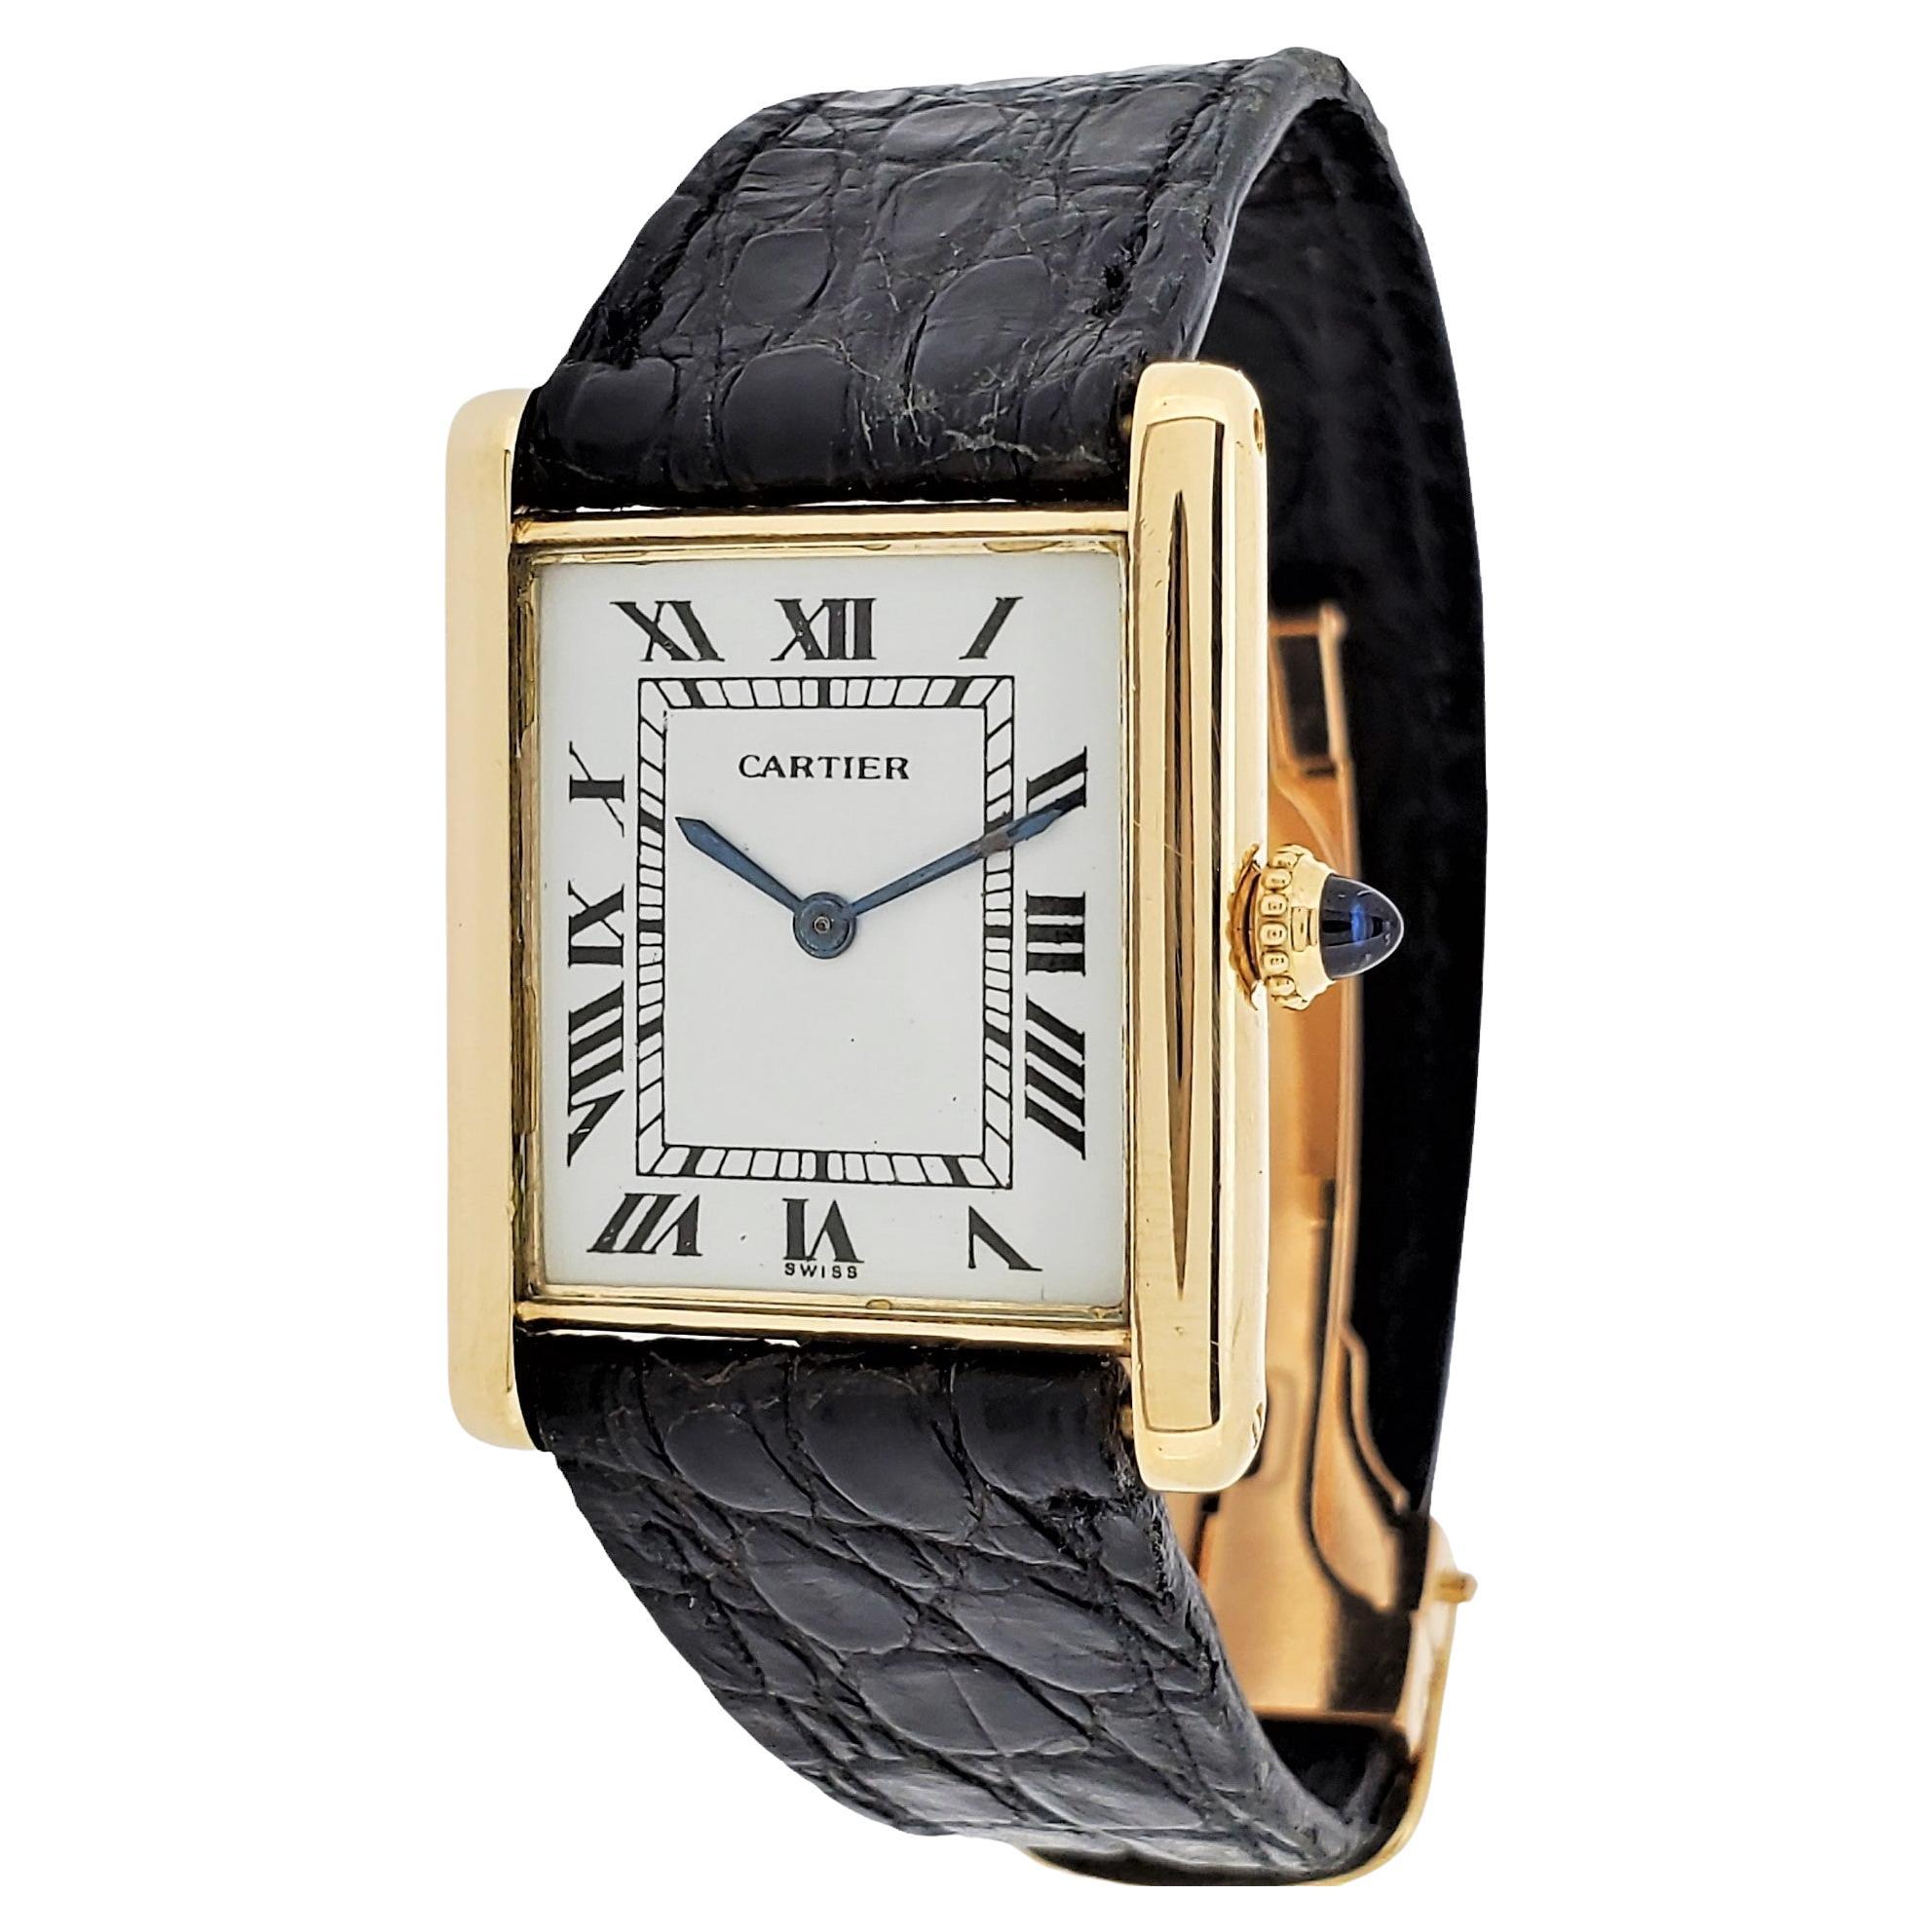 Which Cartier Tank is the original?